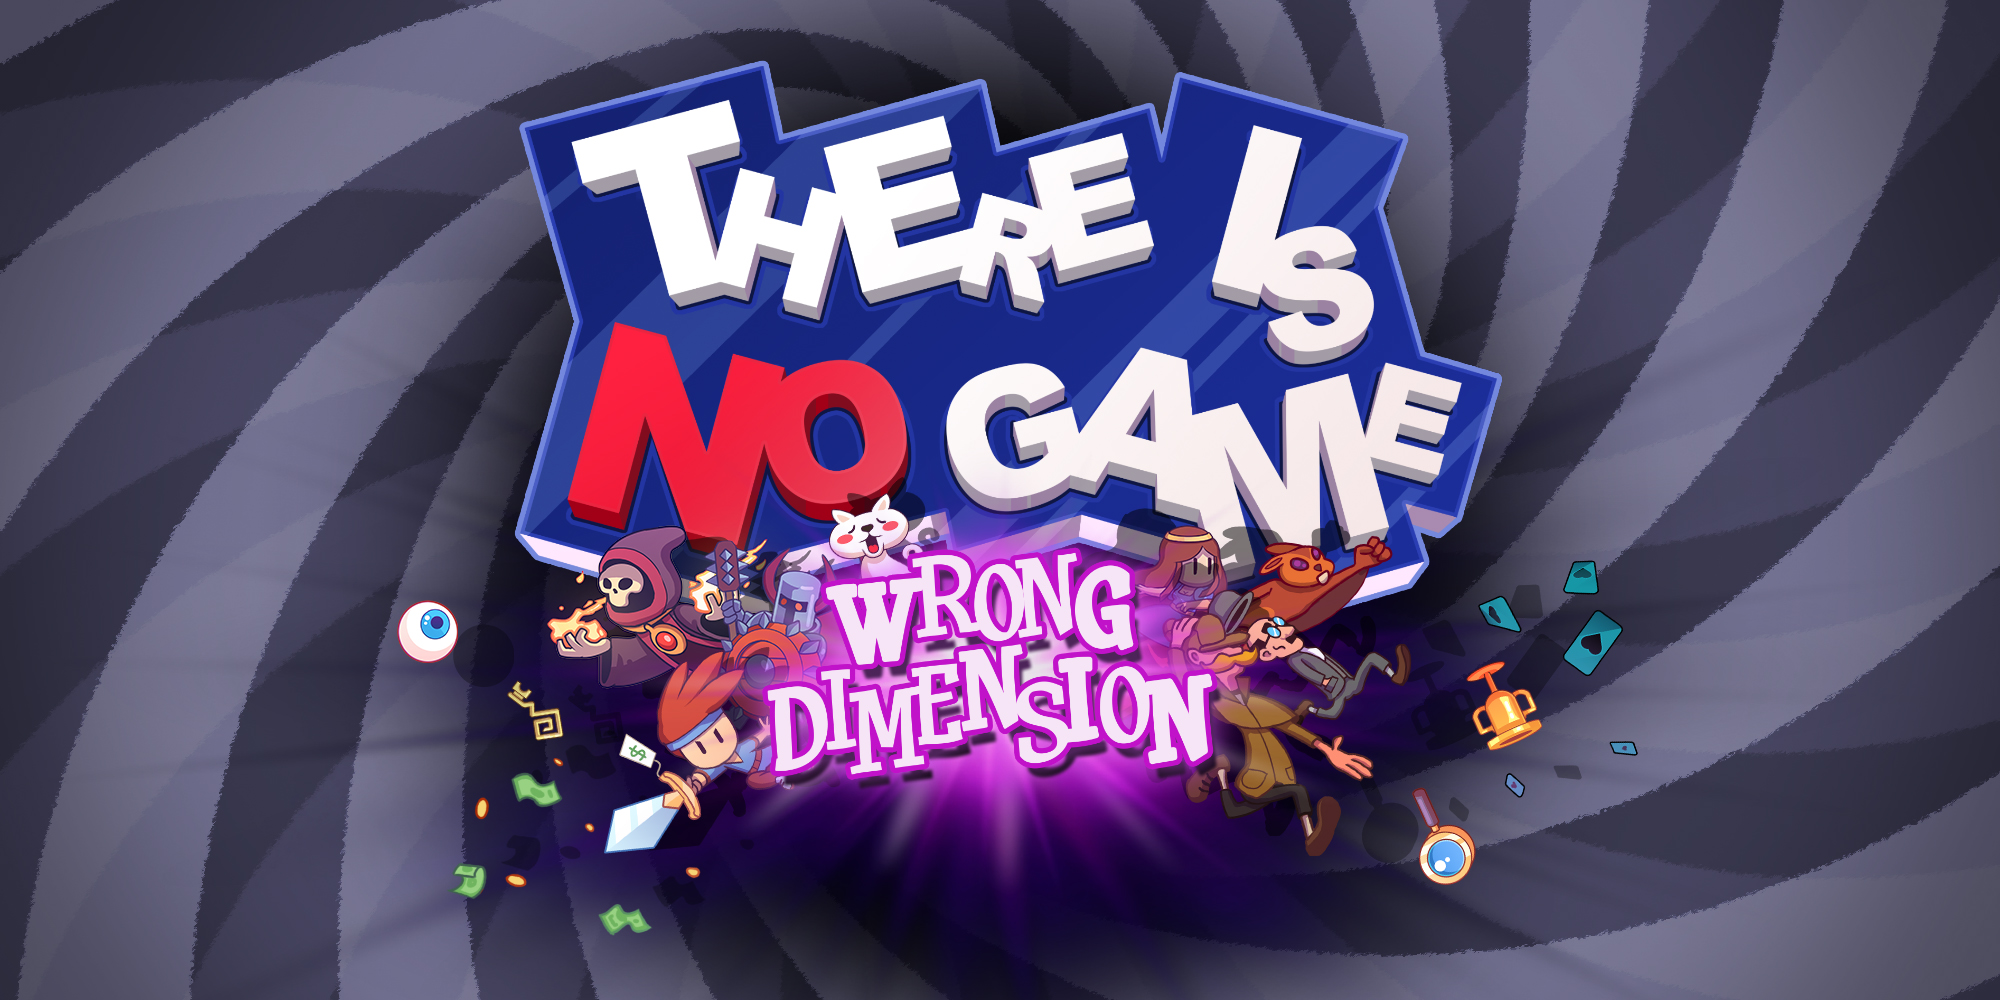 There is no game Wrong dimension